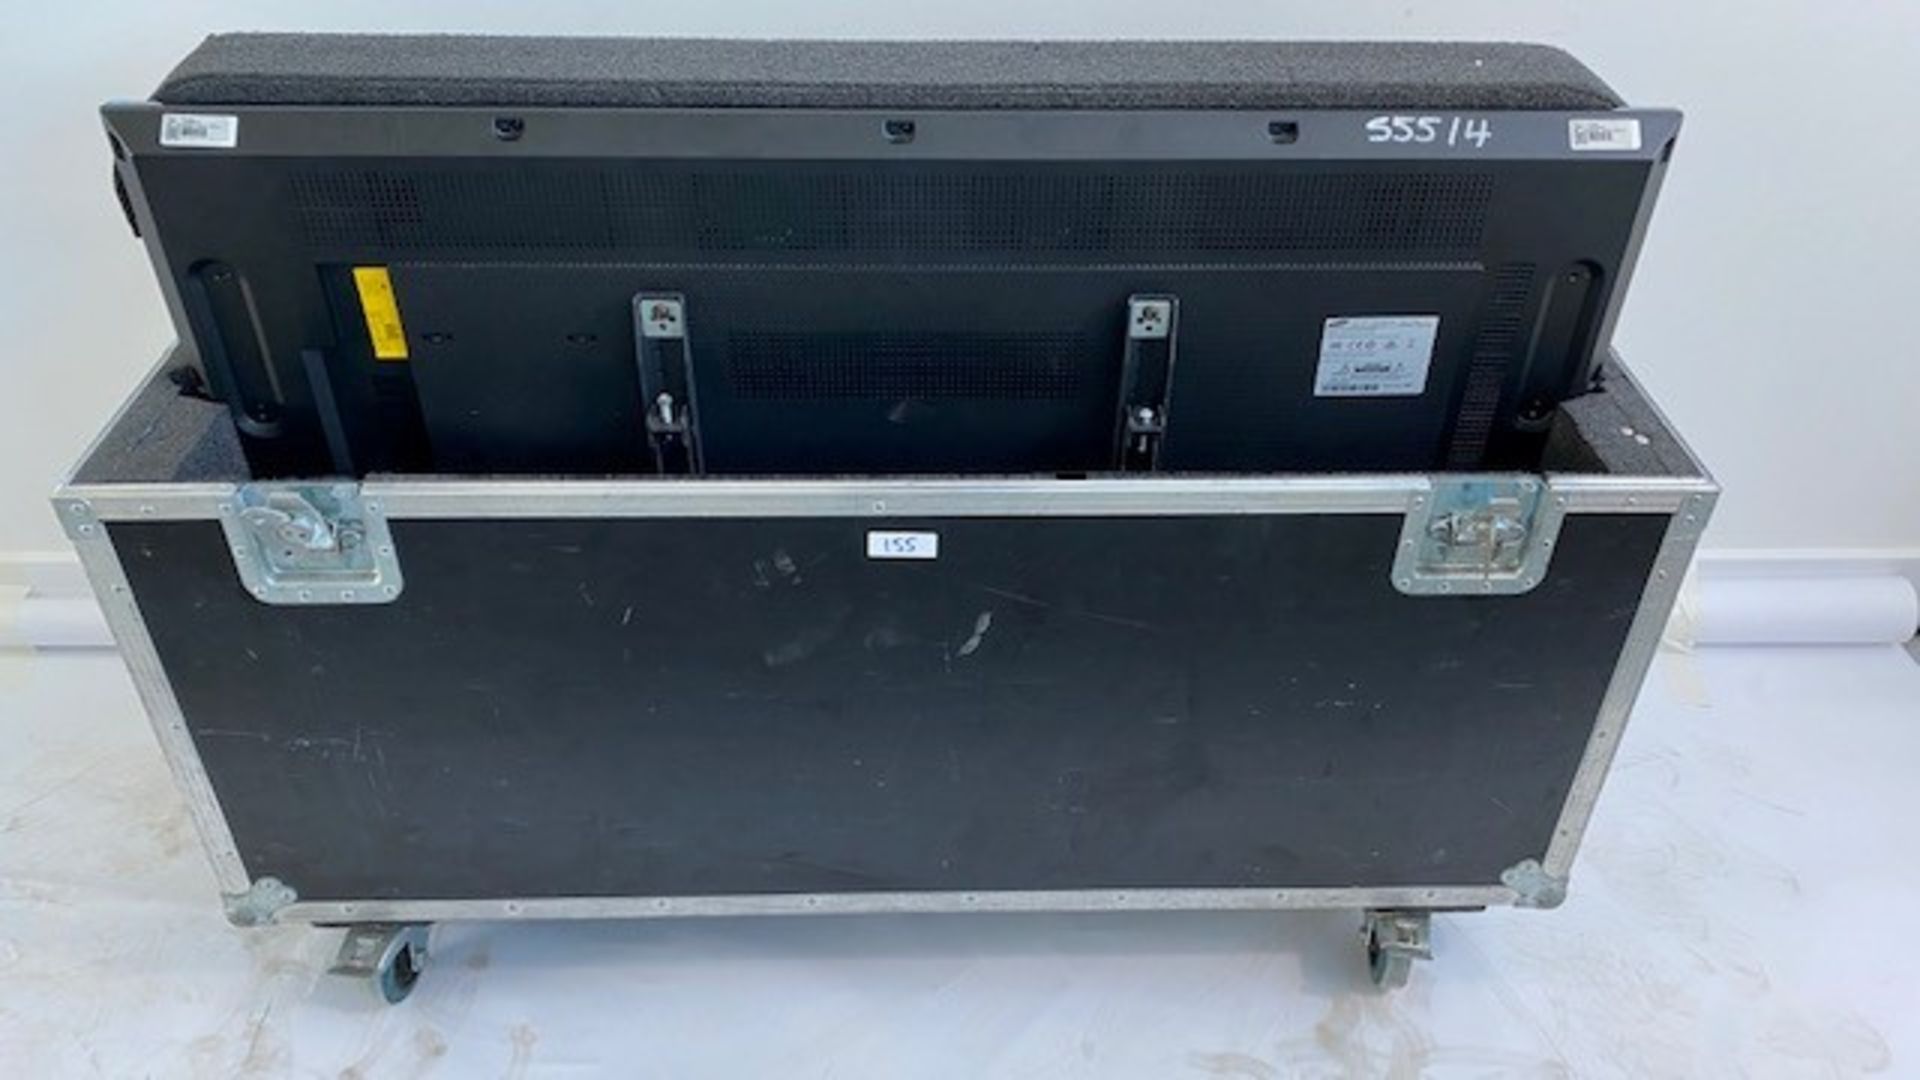 1 x Samsung 55" DM55D Colour Display Unit With Hanging Bracket In A Dual Flight Case - Image 2 of 3